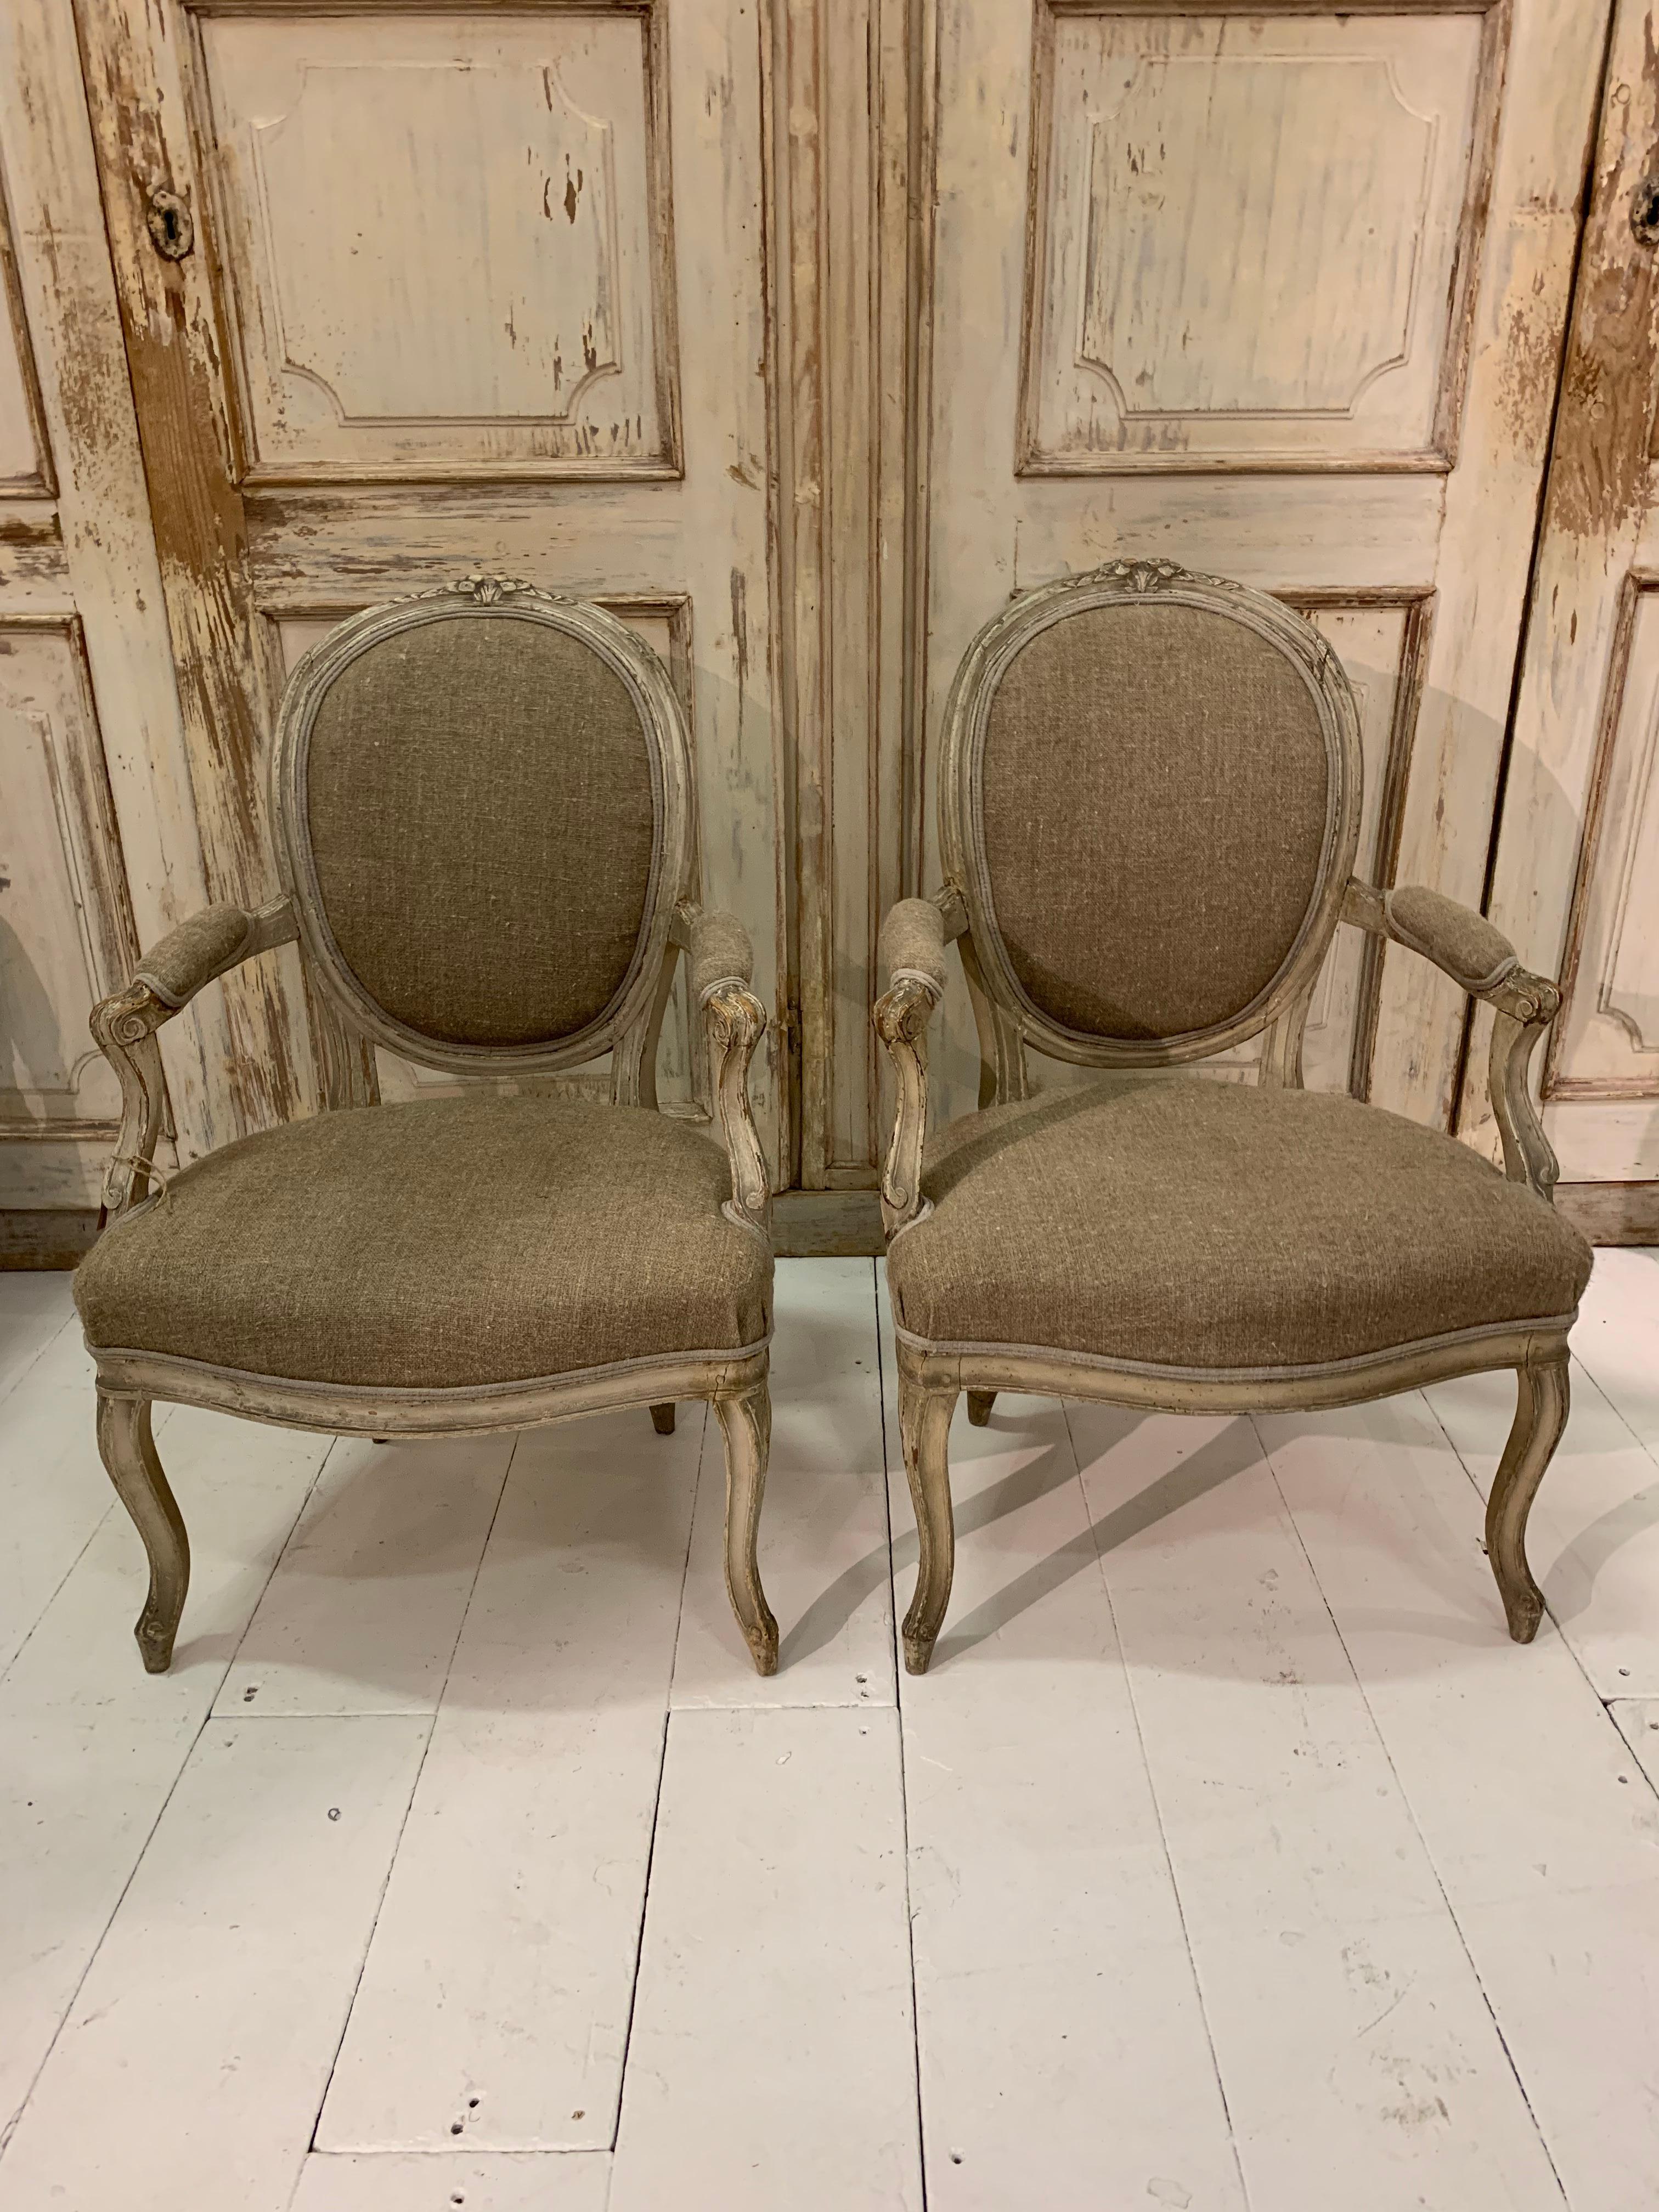 A lovely pair of late 19th century French open armchairs with carved detail and original paint.
The armchairs have been upholstered in hungarian linen and would work well as a comfortable pair of side chairs and also a perfect addition in a bedroom.